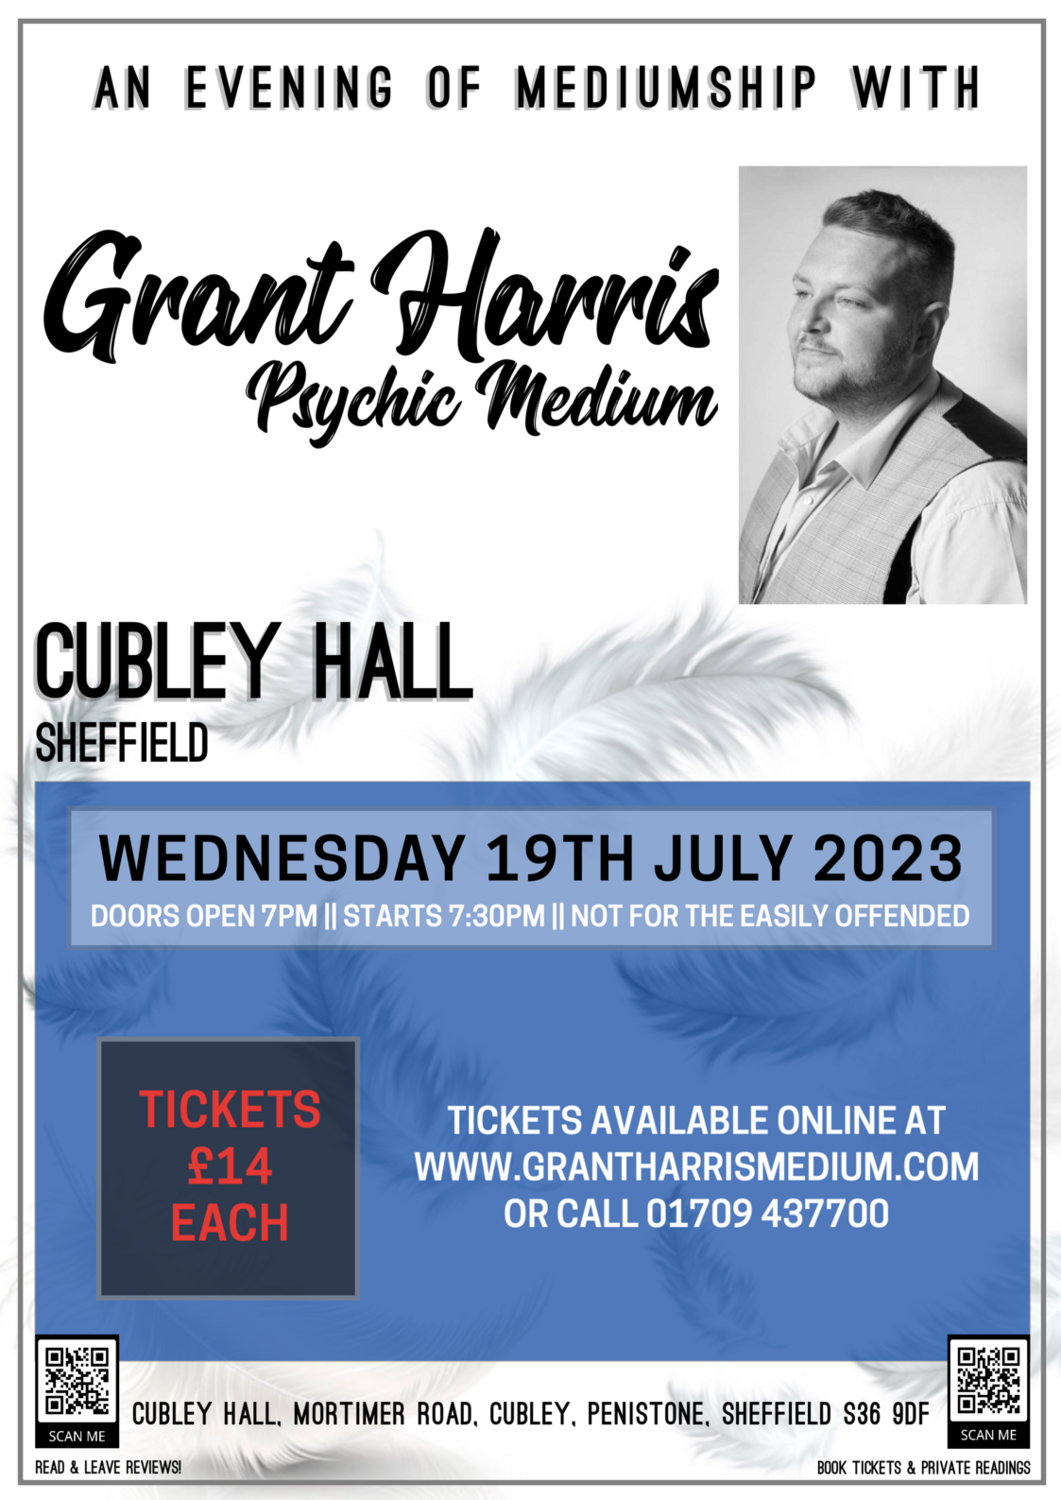 Cubley Hall, Penistone, Sheffield, Wednesday 19th July 2023